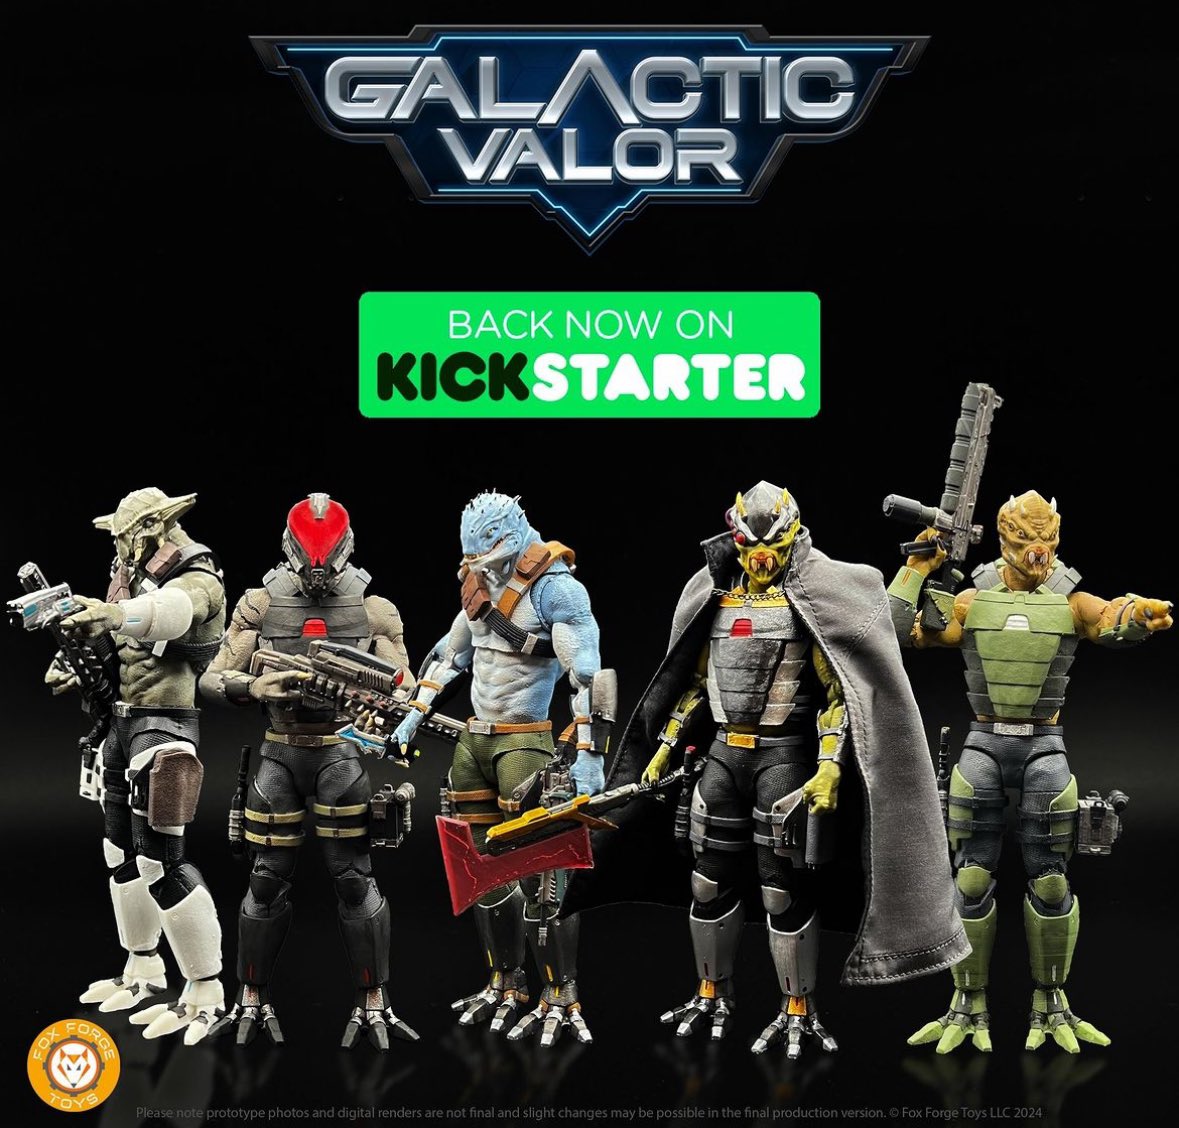 🚨WE’RE LIVE PAL🚨

The new @foxforgetoys Galactic Valor campaign is LIVE on @kickstarter! We had hands-on with these prototypes and think there’s something special here you don’t want to miss. Back now through 4/24.

kickstarter.com/projects/foxfo…

#toys #galacticvalor #foxforgetoys